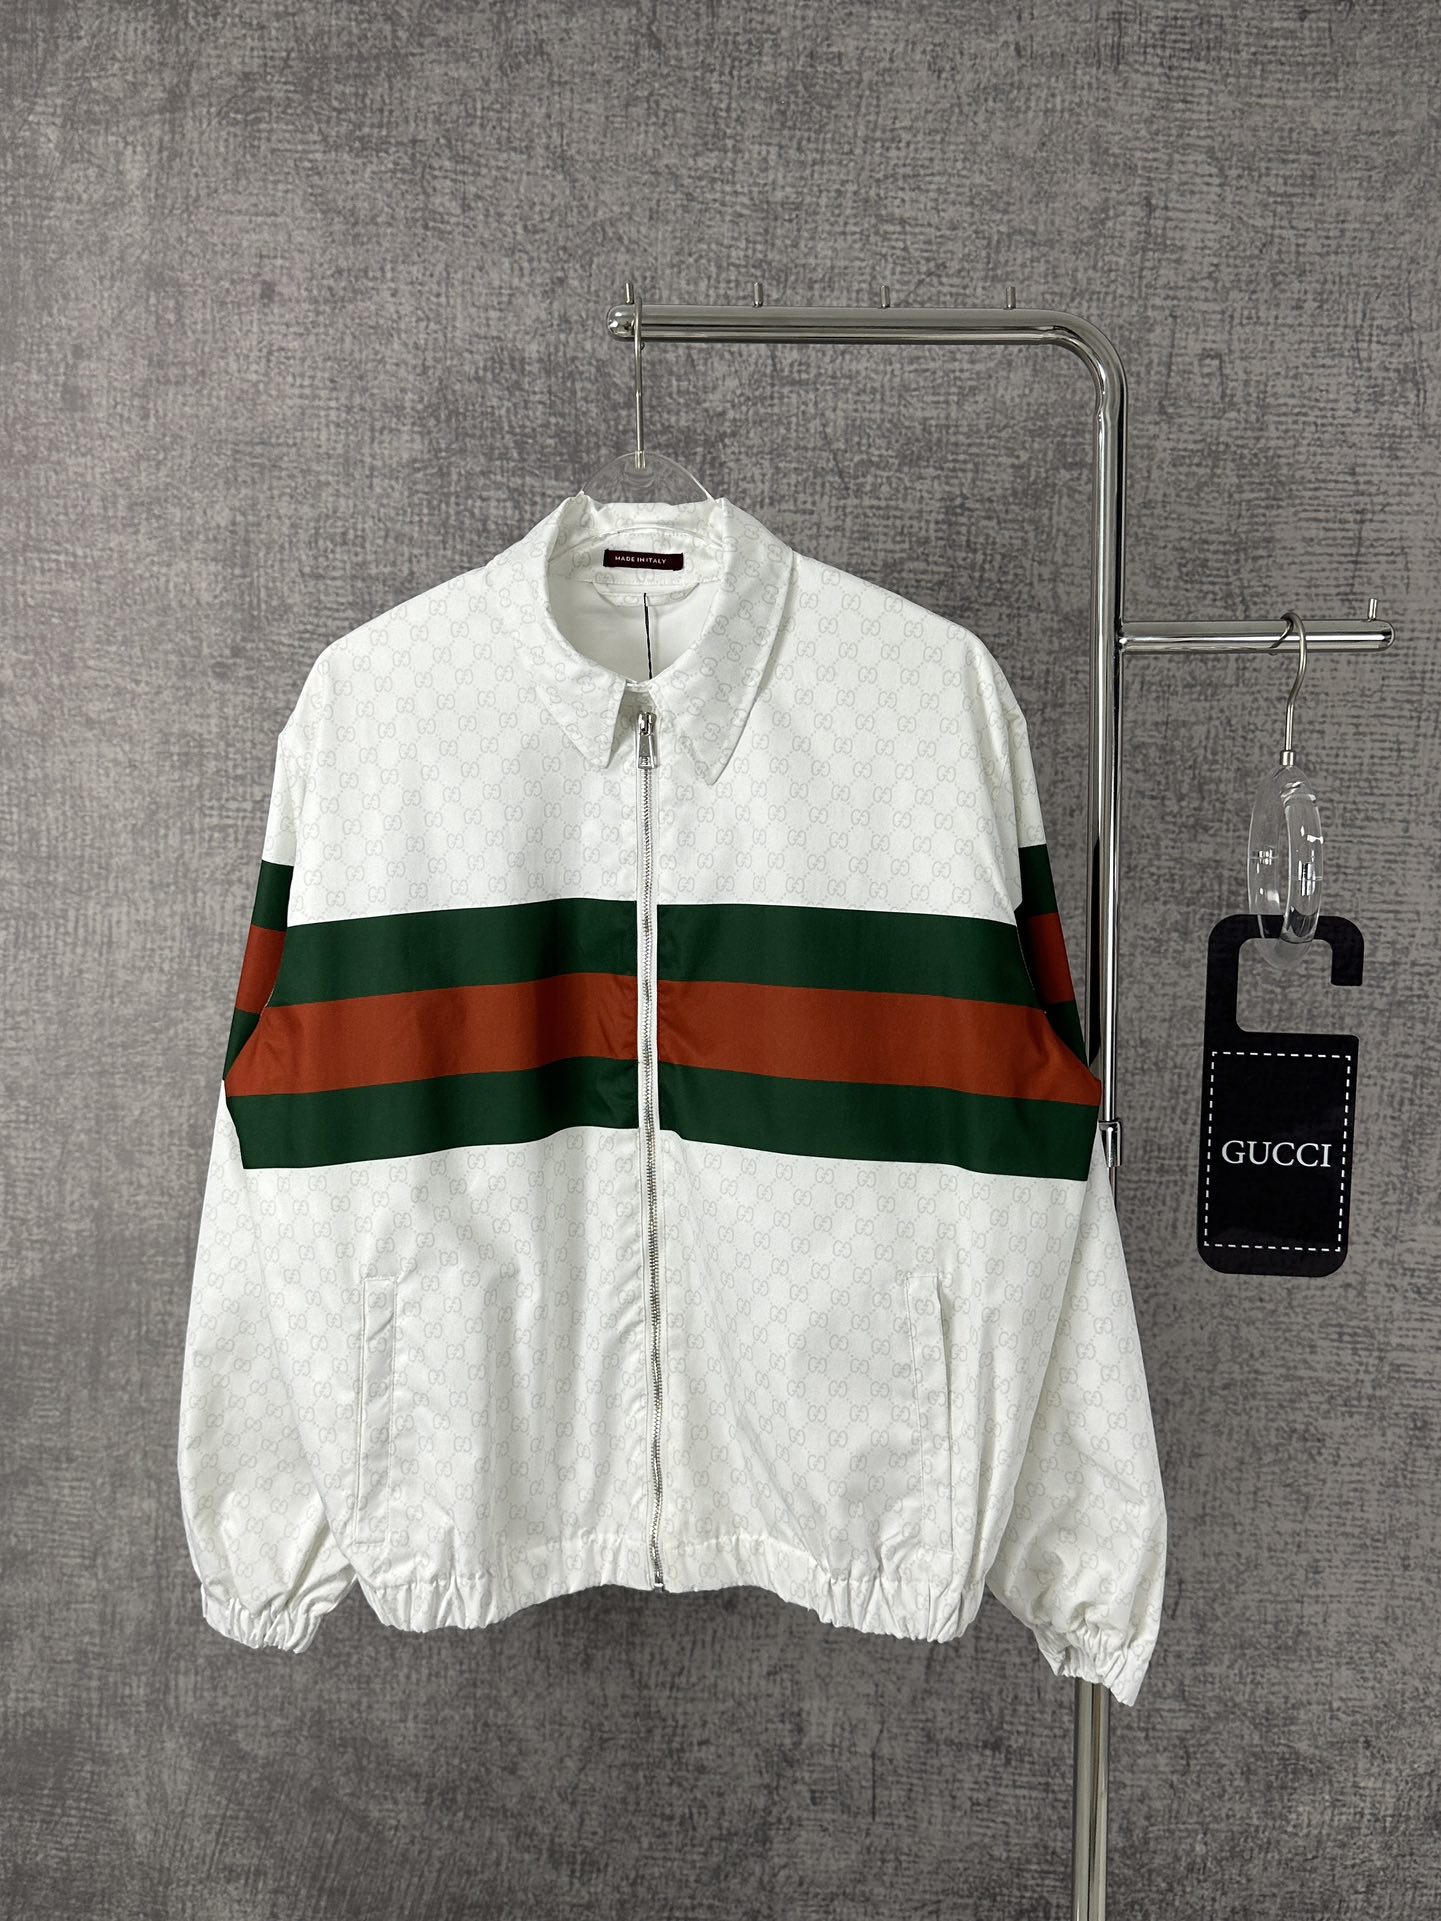 Gucci Clothing Coats & Jackets Pants & Trousers Green Red White Printing Unisex Cotton Spring Collection Casual